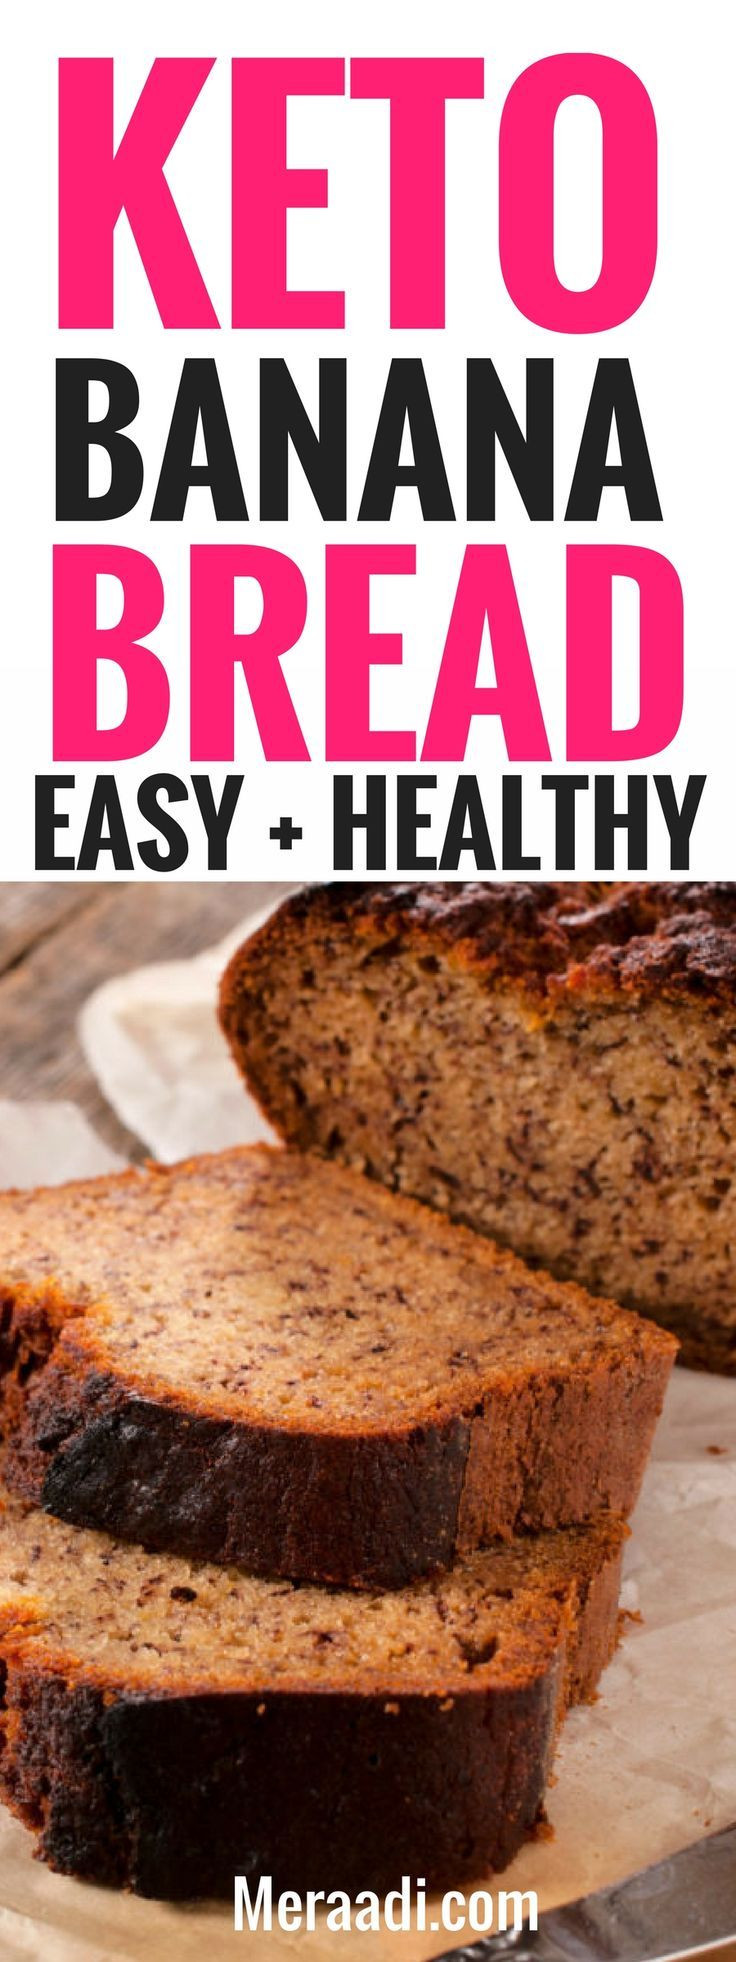 Best Keto Banana Bread
 This easy and healthy keto banana bread is THE BEST I m